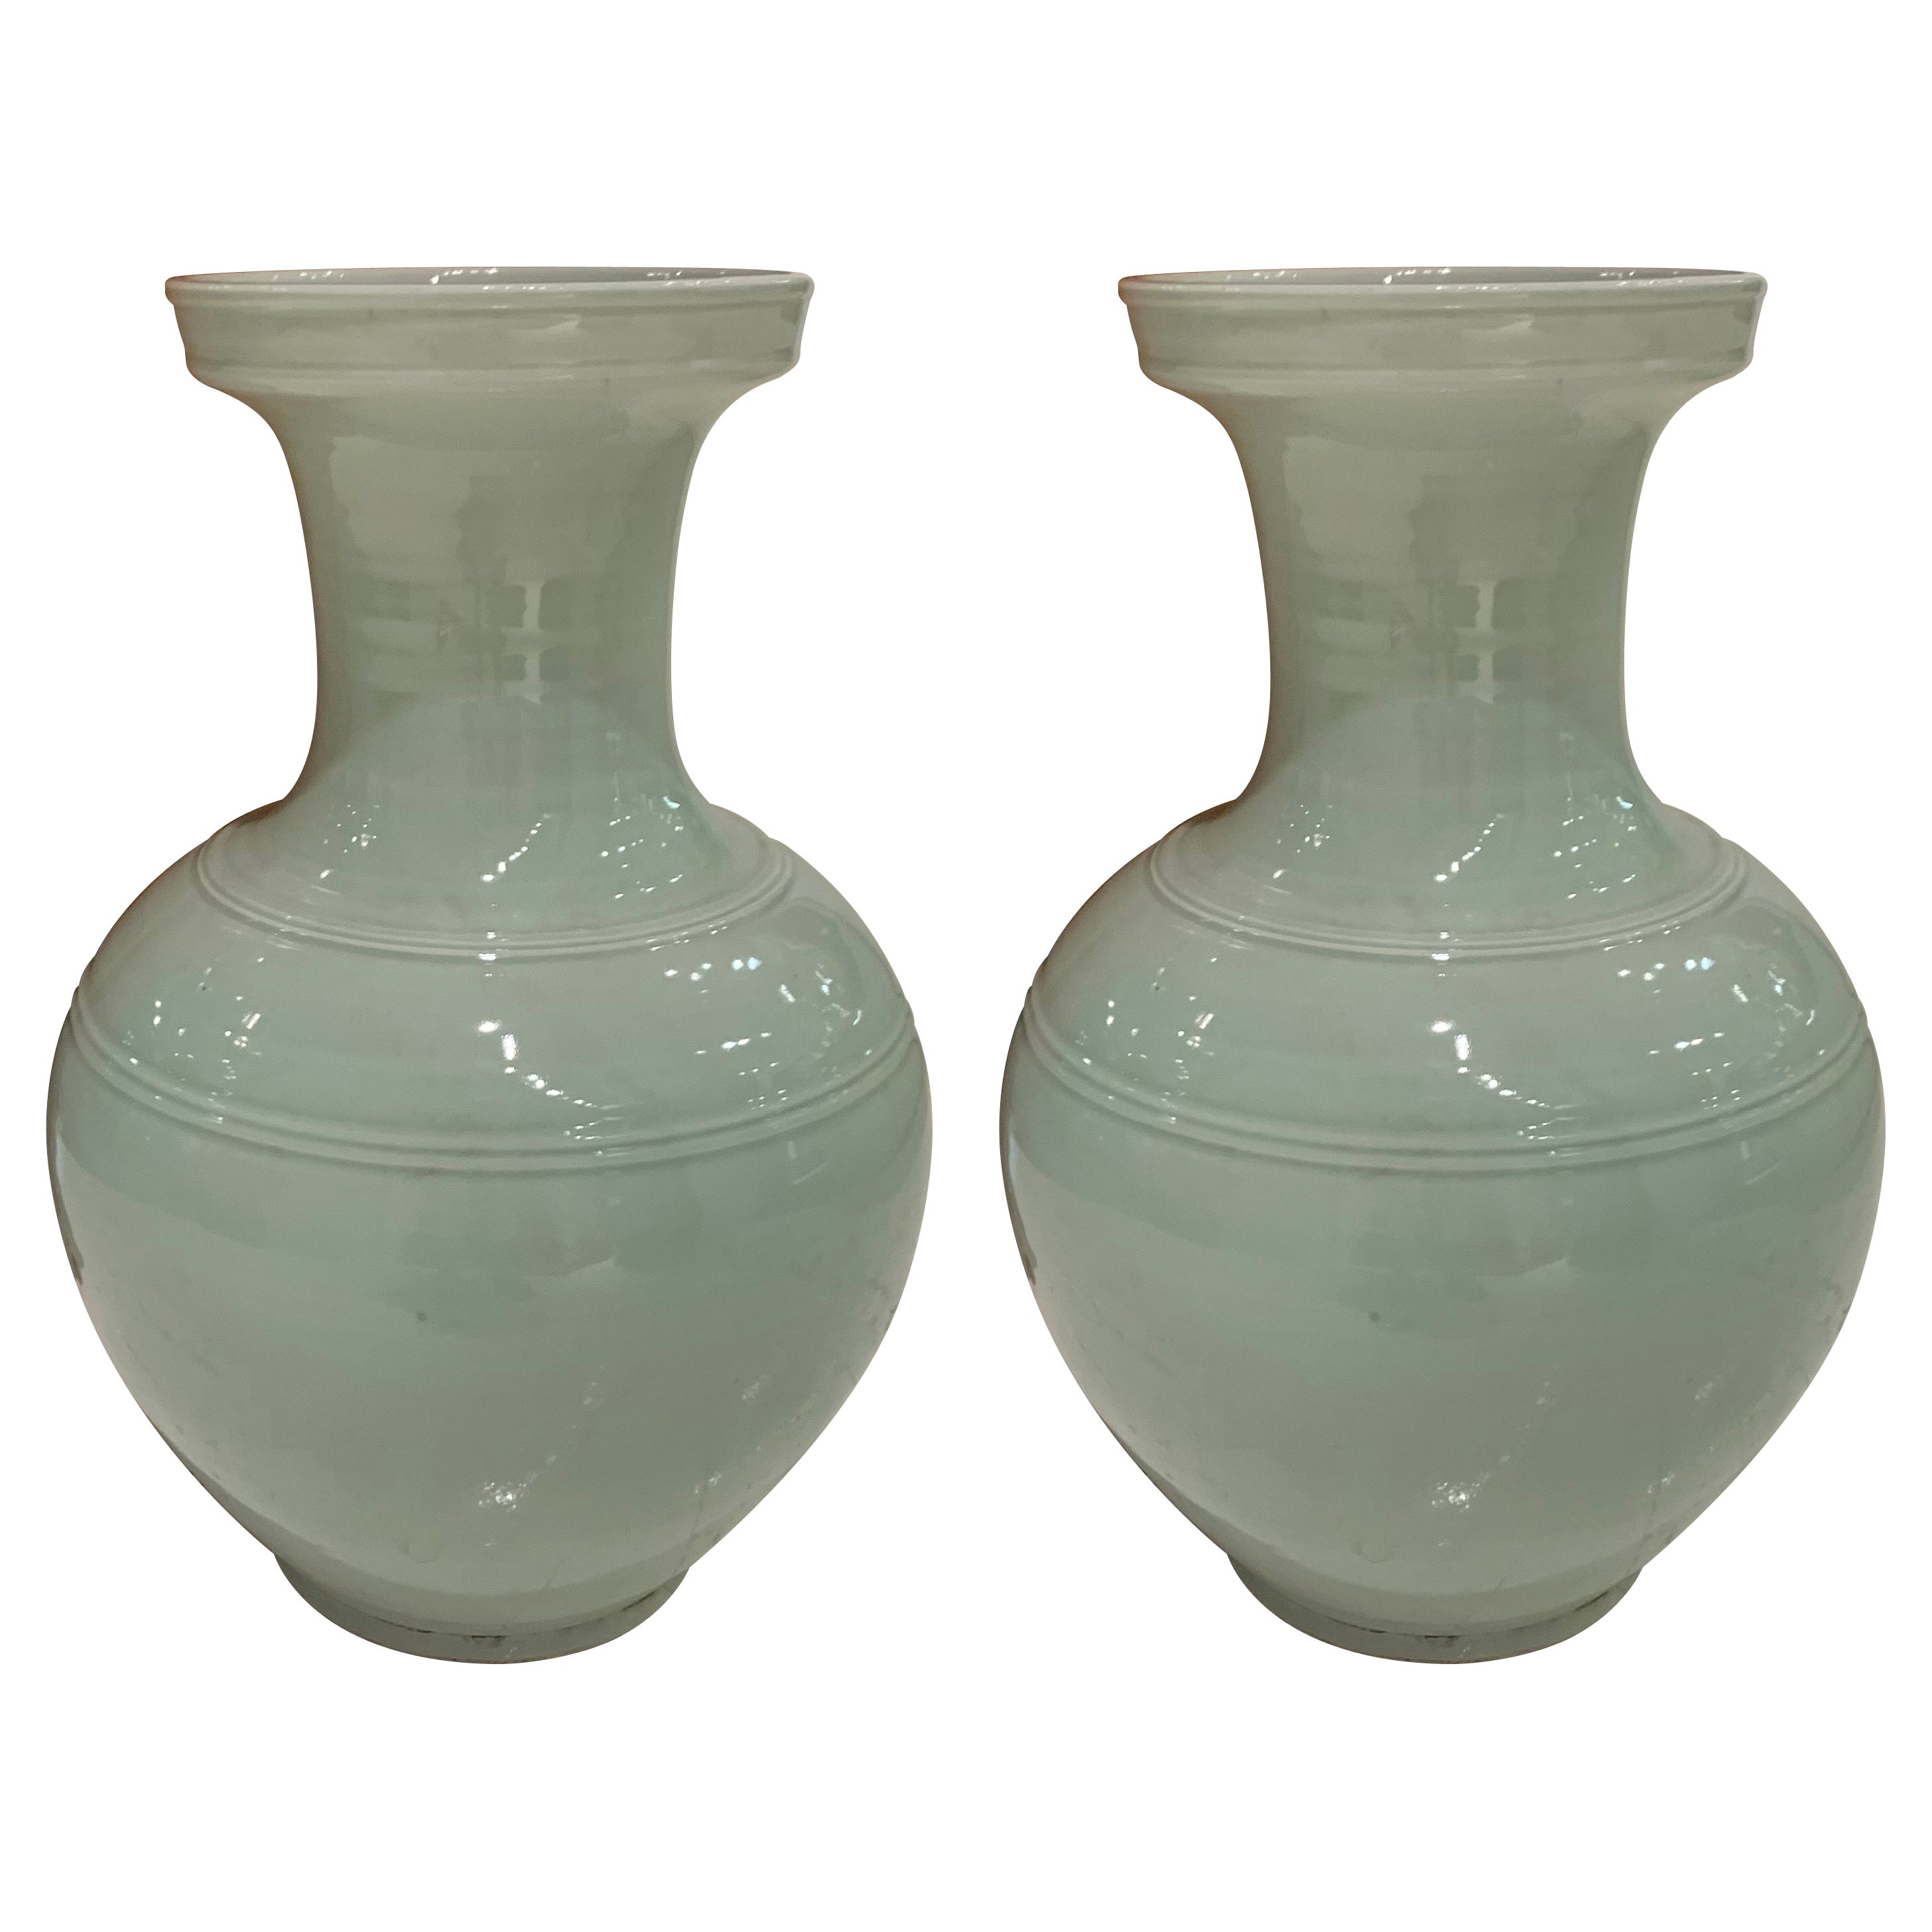 Pale Turquoise Large Pair Vases, China, Contemporary